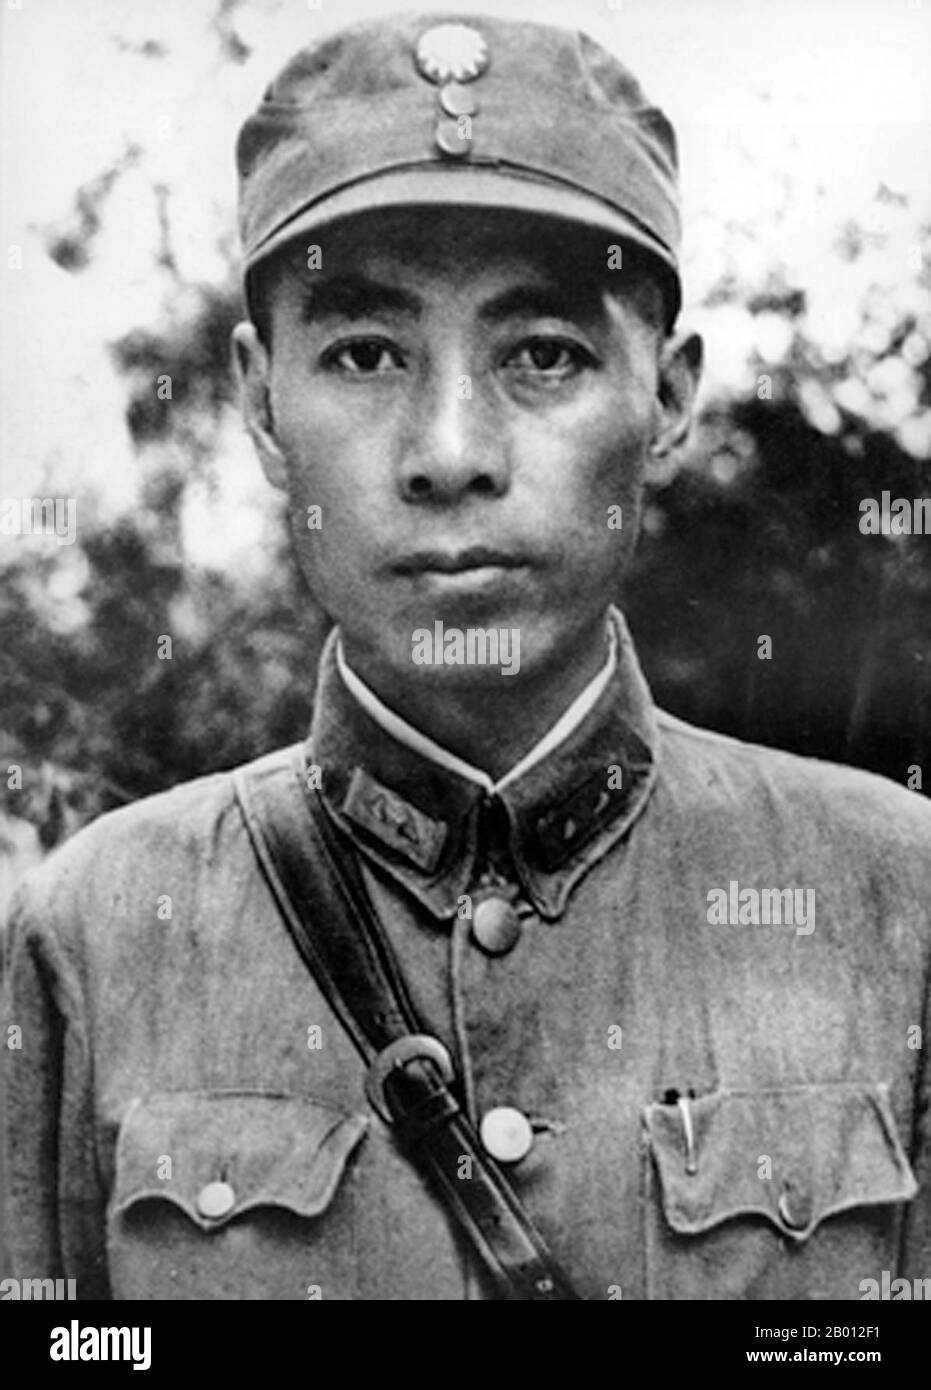 China: Zhou Enlai (Chou En-lai, 5 March 1898 – 8 January 1976)  at Whampoa Military Academy, c. 1926.  Zhou Enlai was the first Premier of the People's Republic of China, serving from October 1949 until his death in January 1976. Zhou was instrumental in the Communist Party's rise to power, and subsequently in the development of the Chinese economy and restructuring of Chinese society. Stock Photo